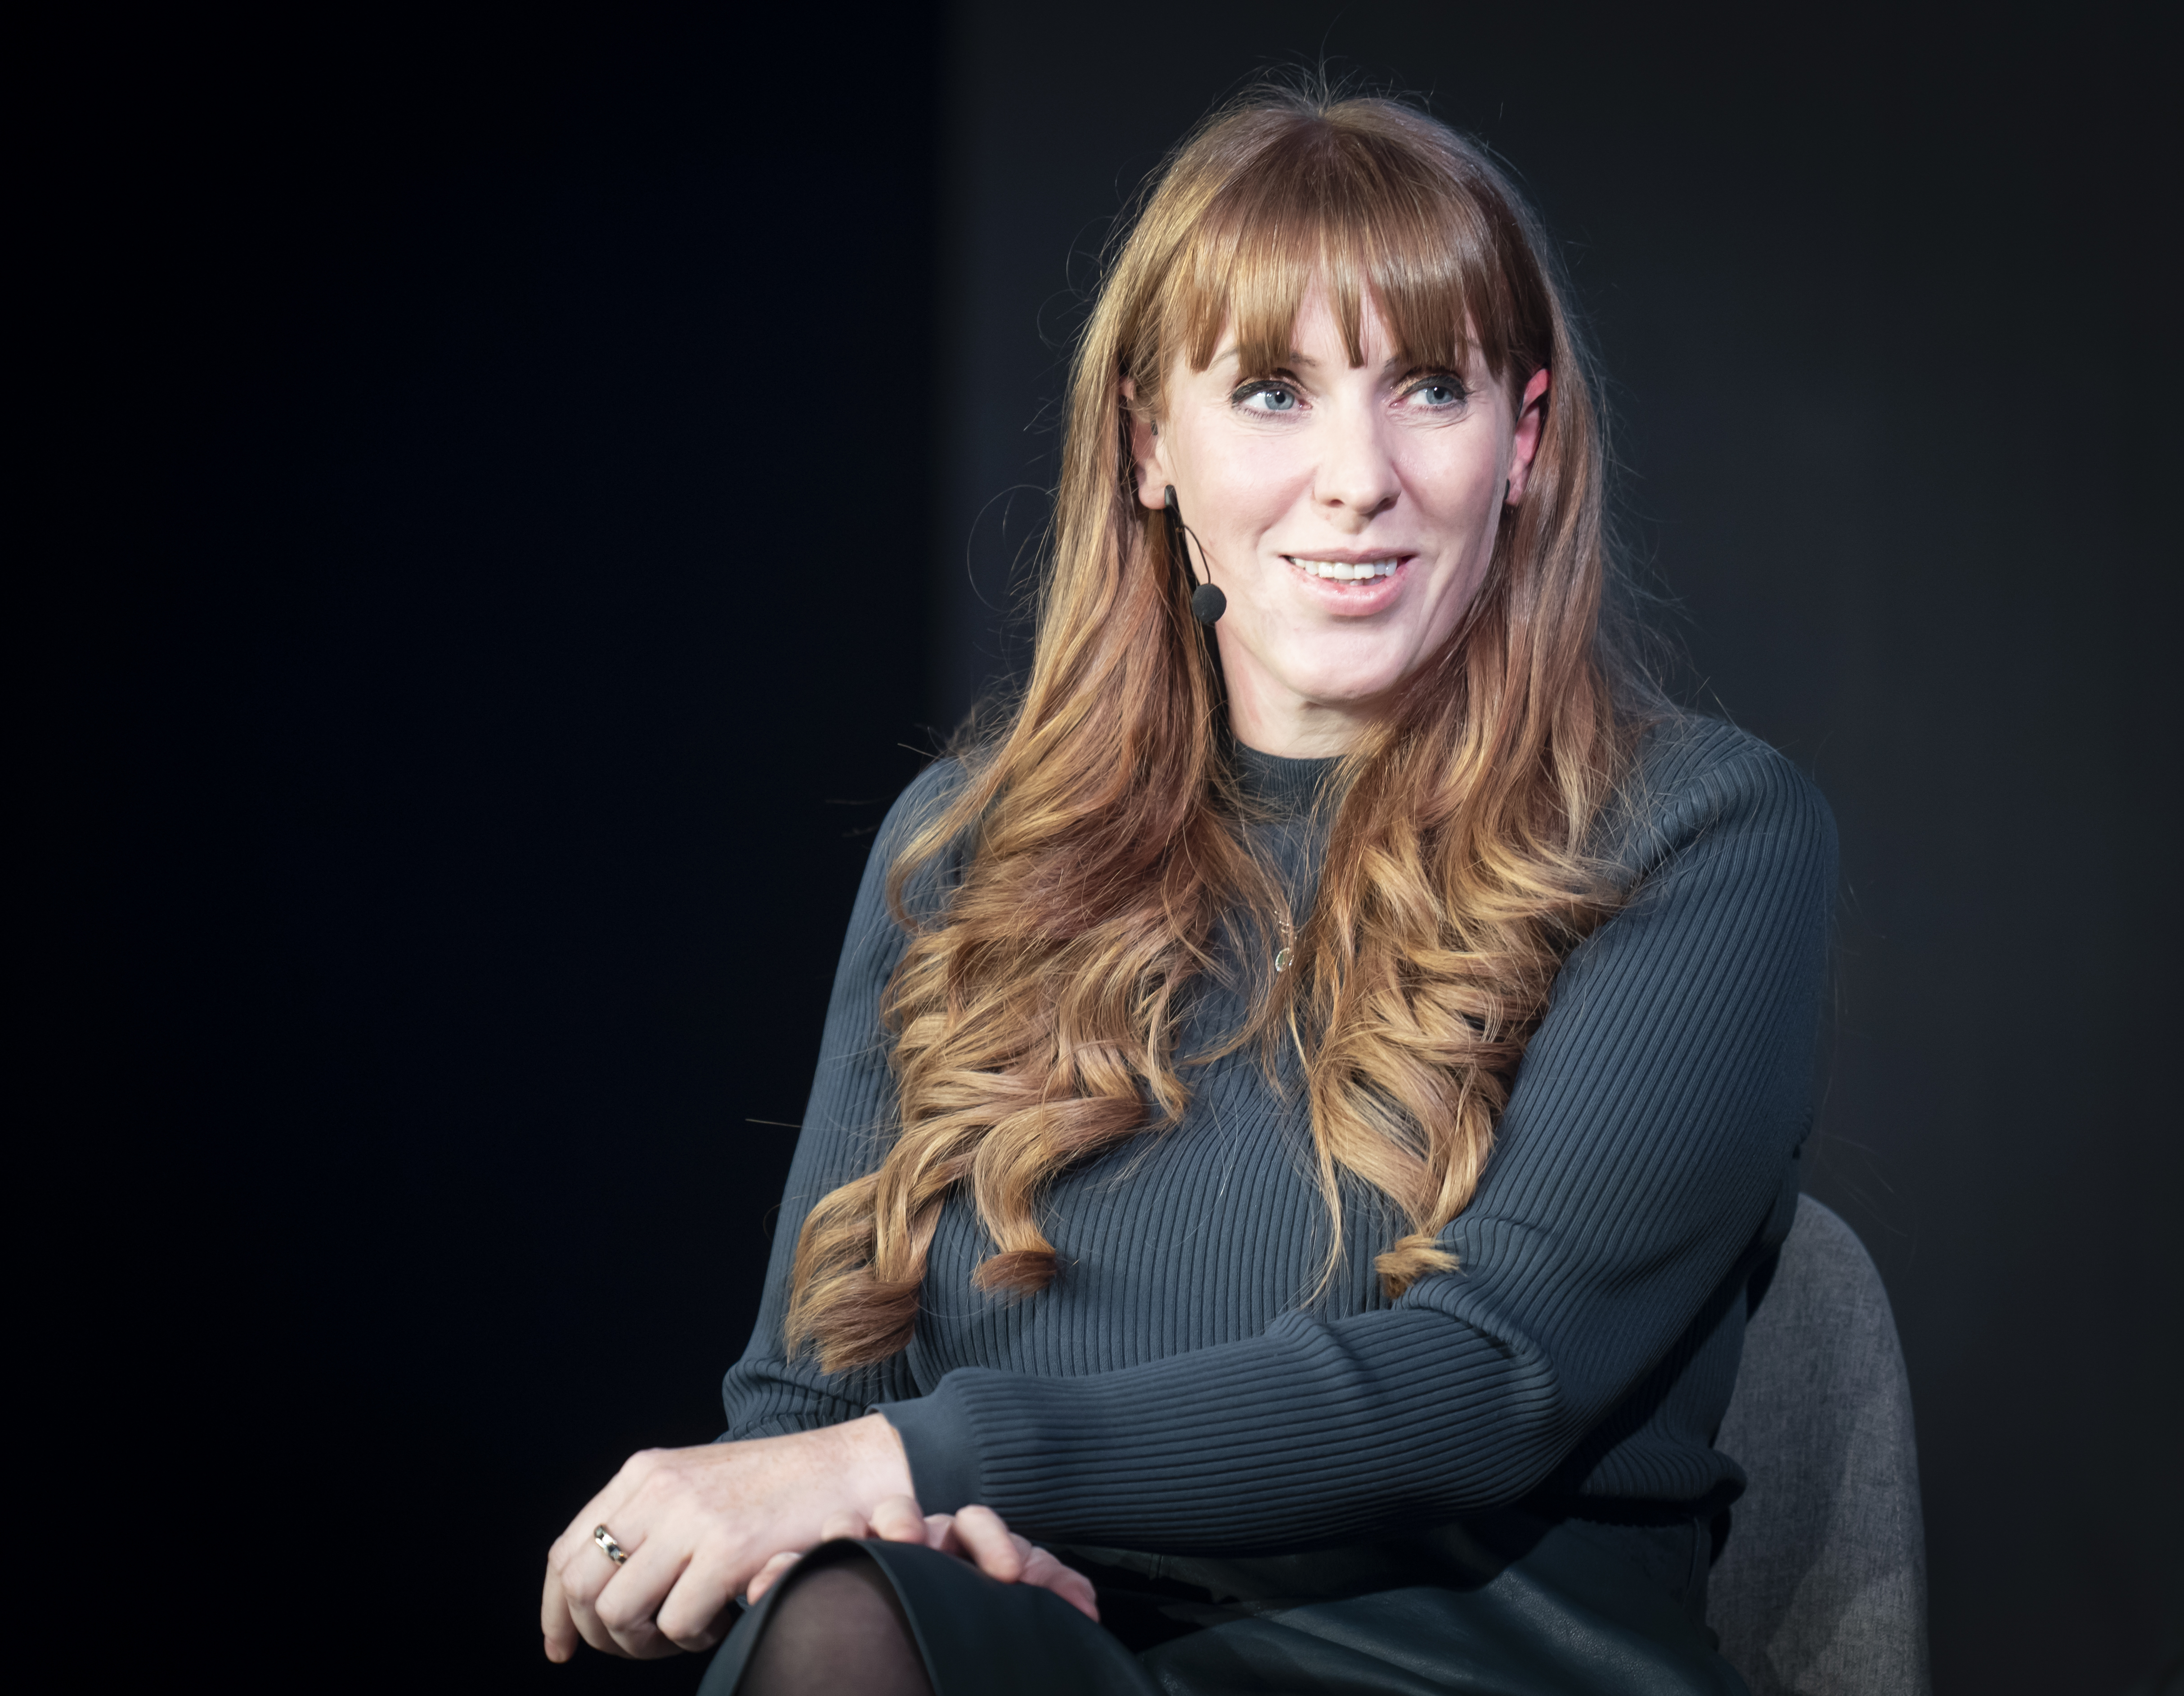 Angela Rayner's ex-staffer Matt Finnegan has written to cops contradicting a claim she made about her home in her council tax row